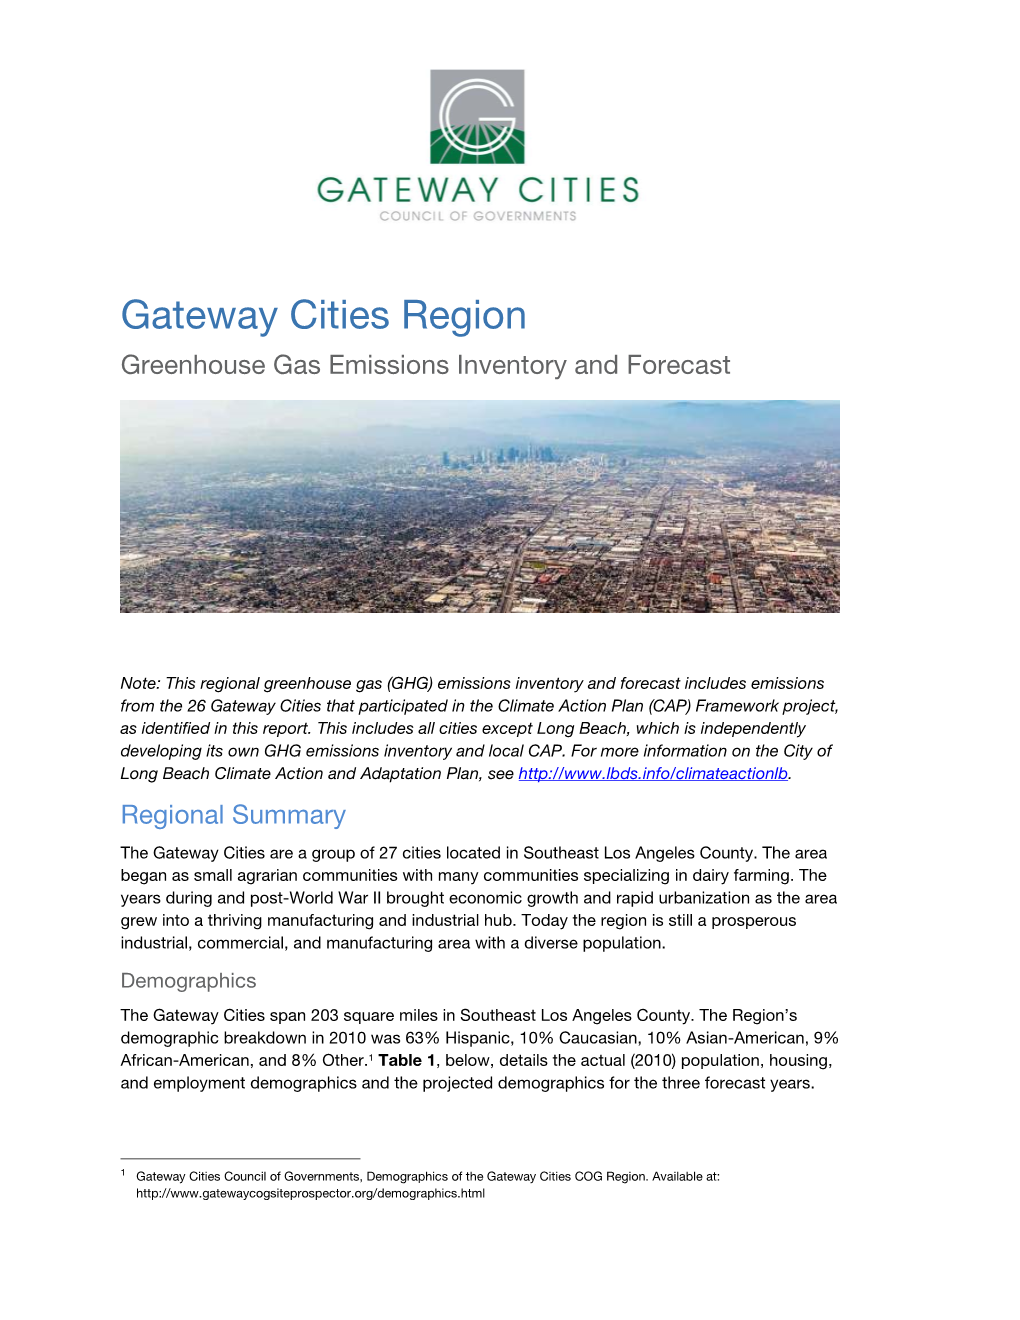 Summary GHG Inventory Report for the Gateway Cities Region